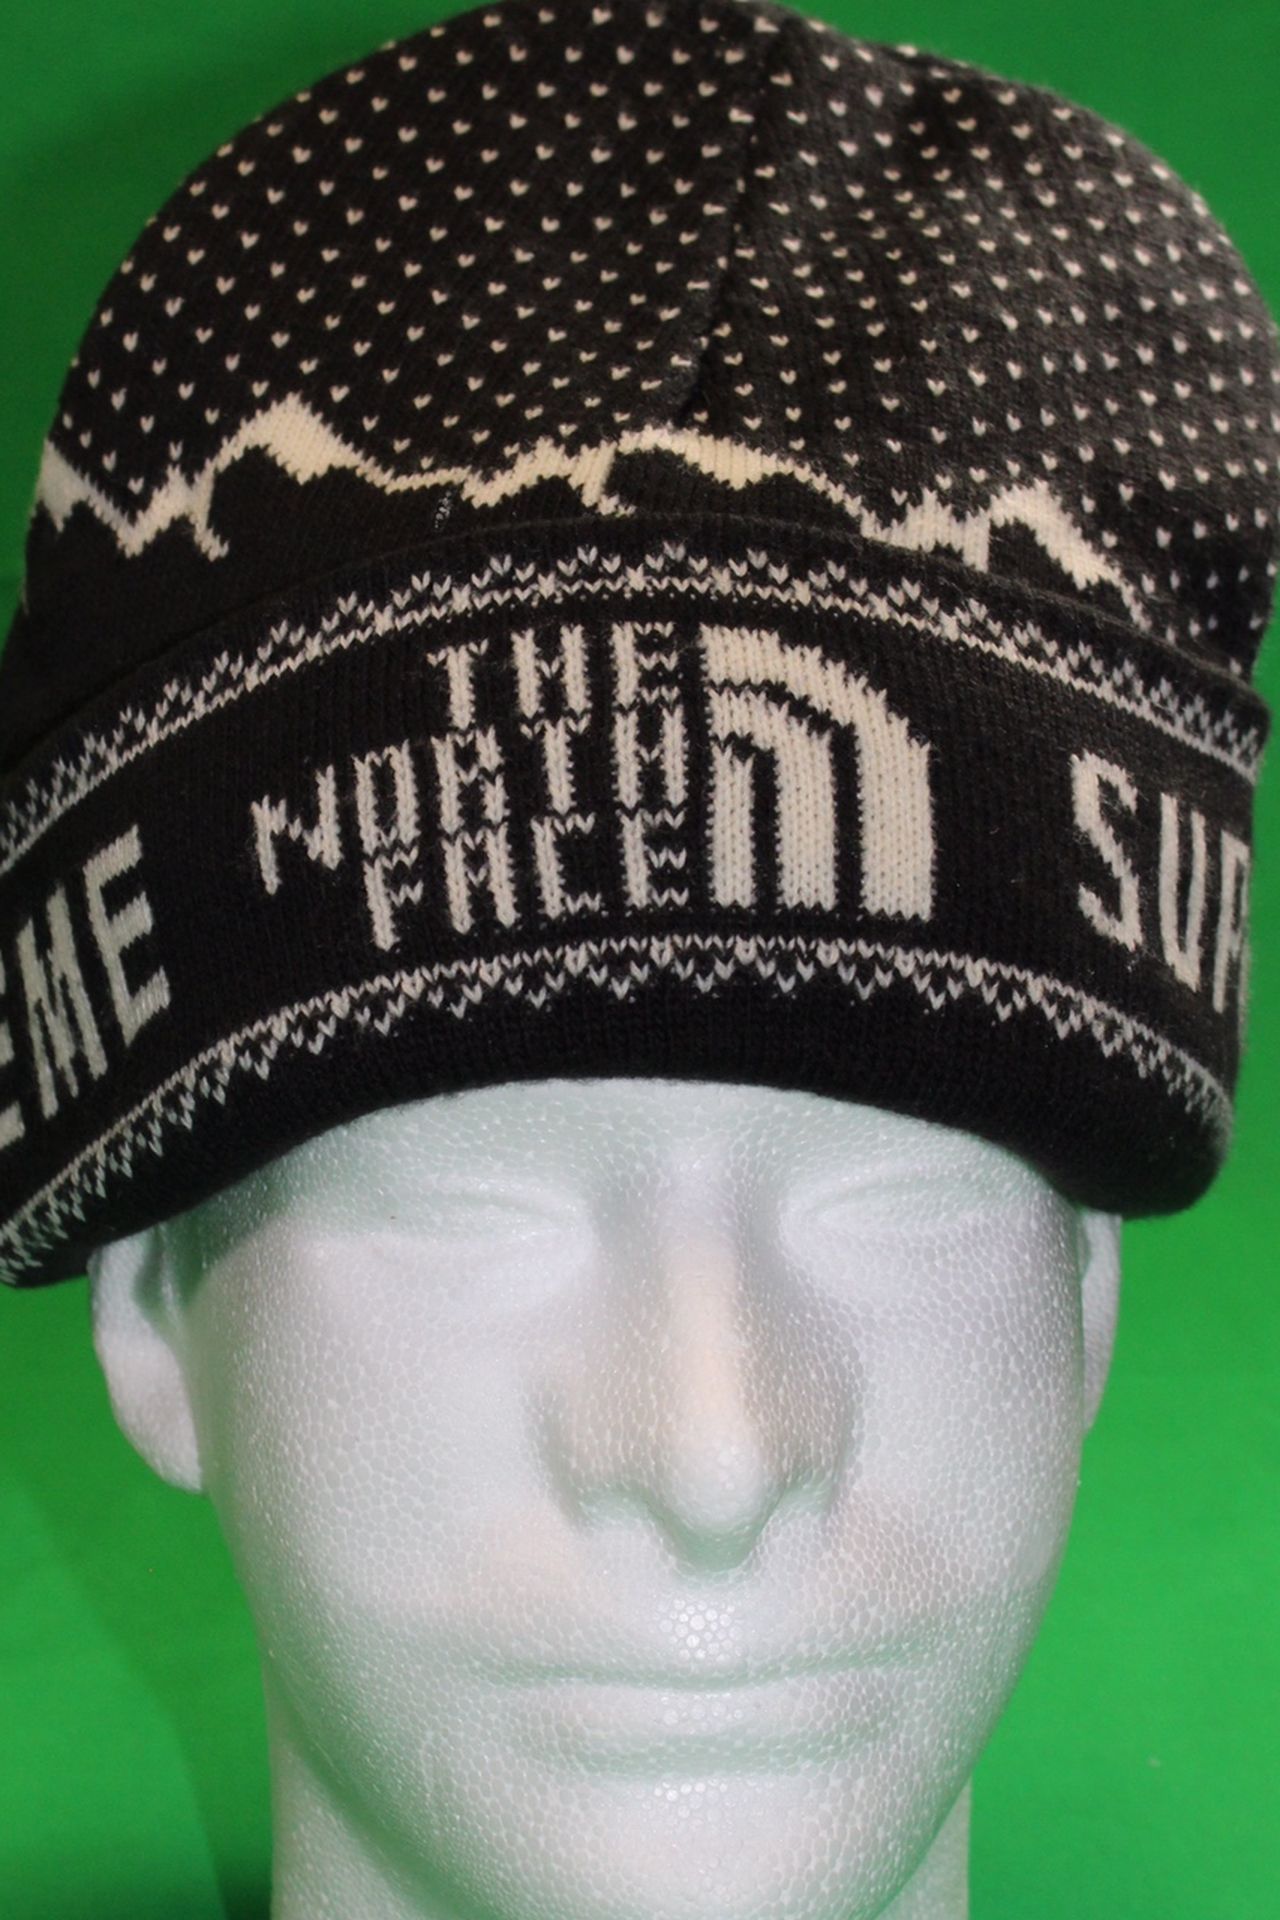 SUPREME x The North Face Expedition Fold Beanie BLACK Winter Hat TNF FW18